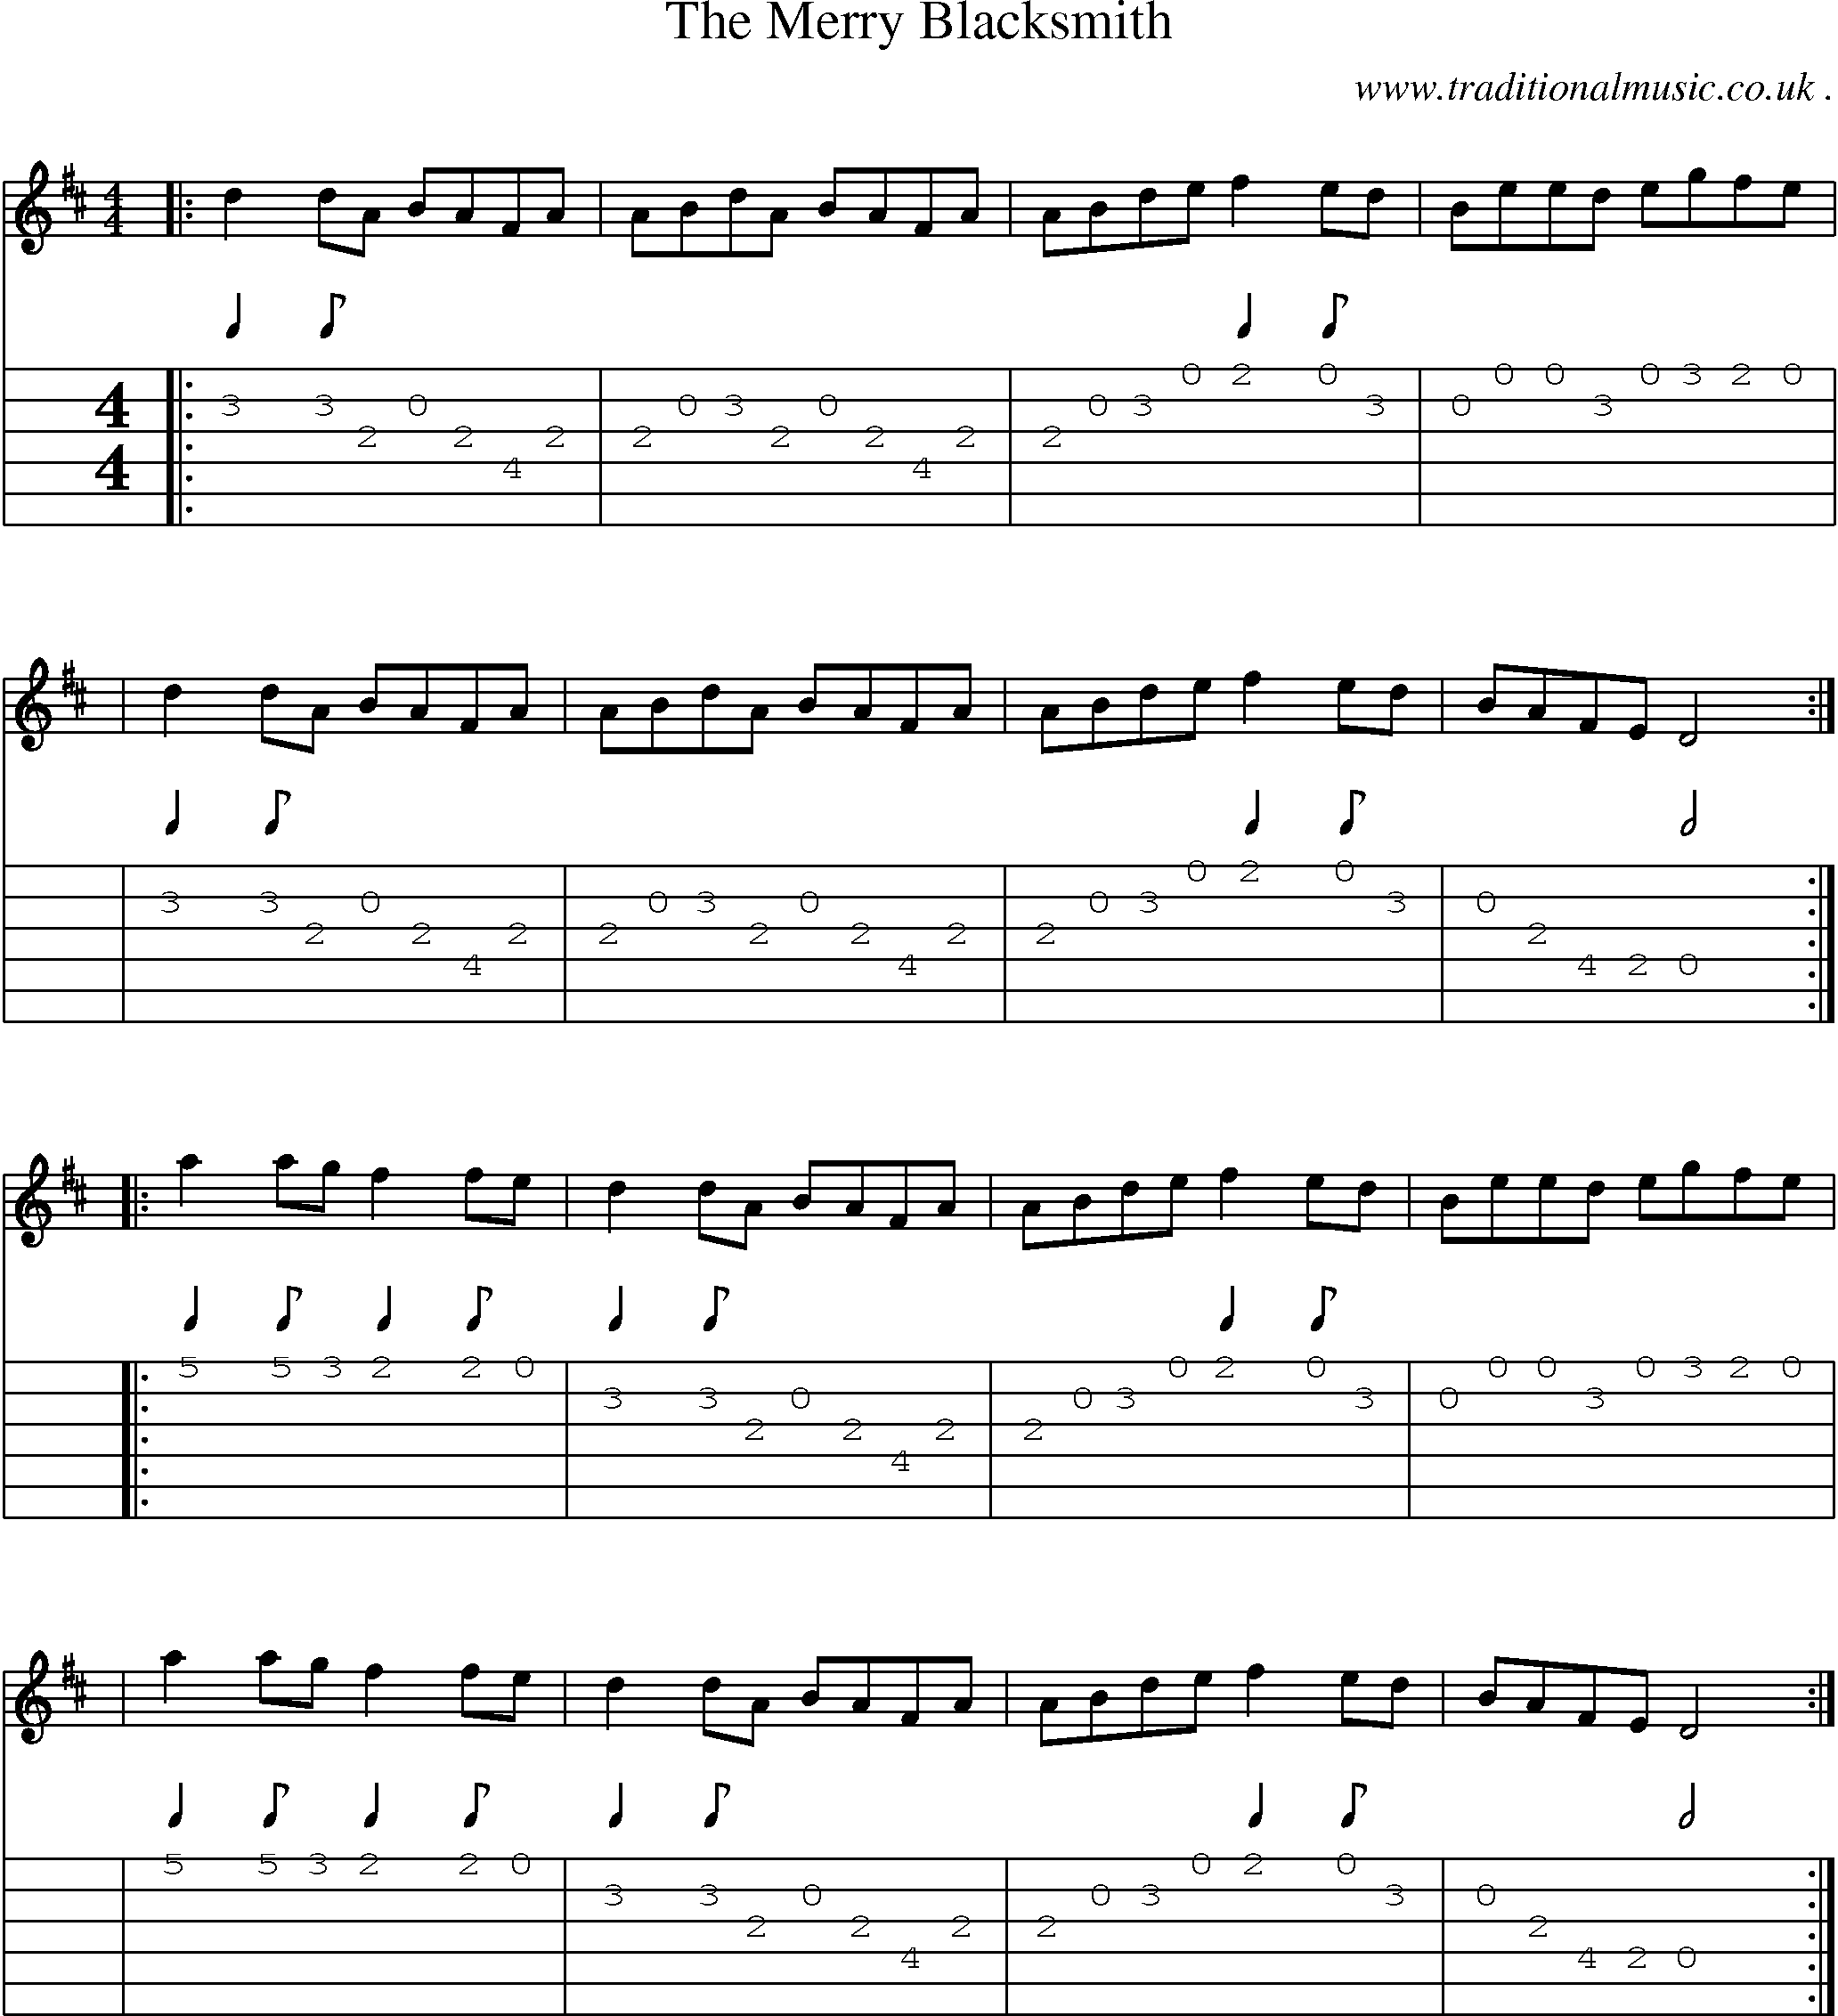 Sheet-Music and Guitar Tabs for The Merry Blacksmith